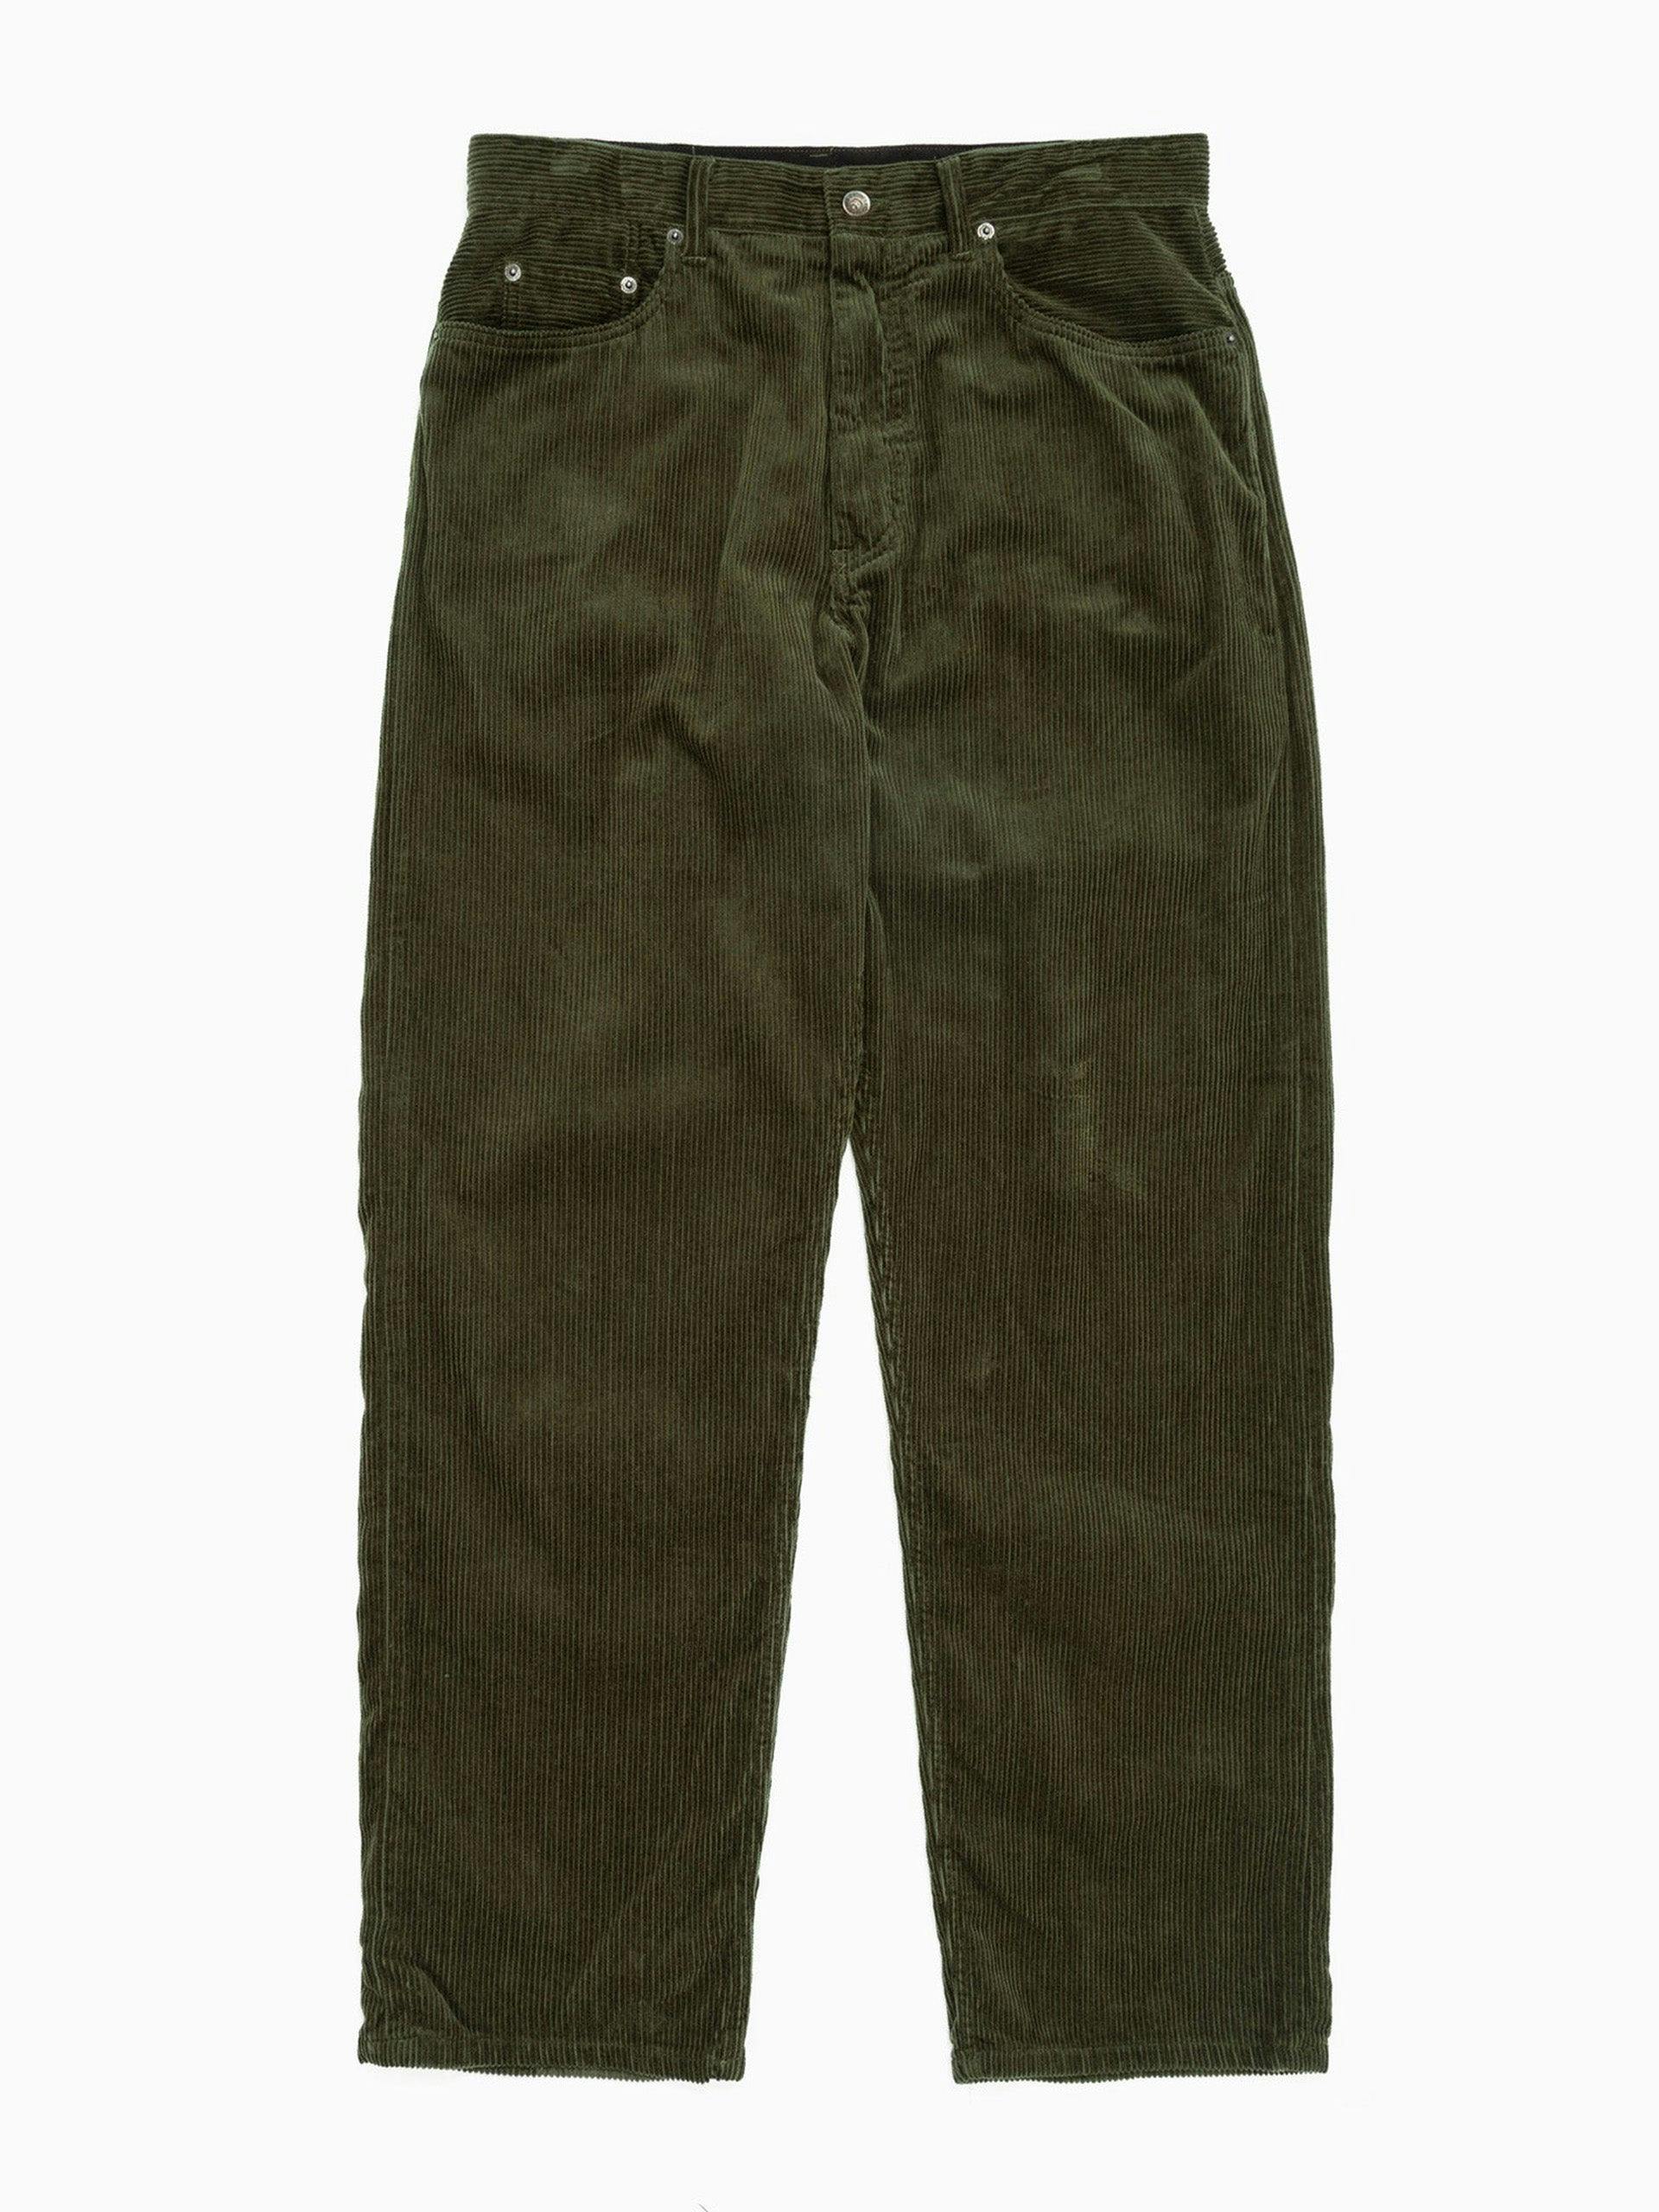 Corduroy trousers in Olive